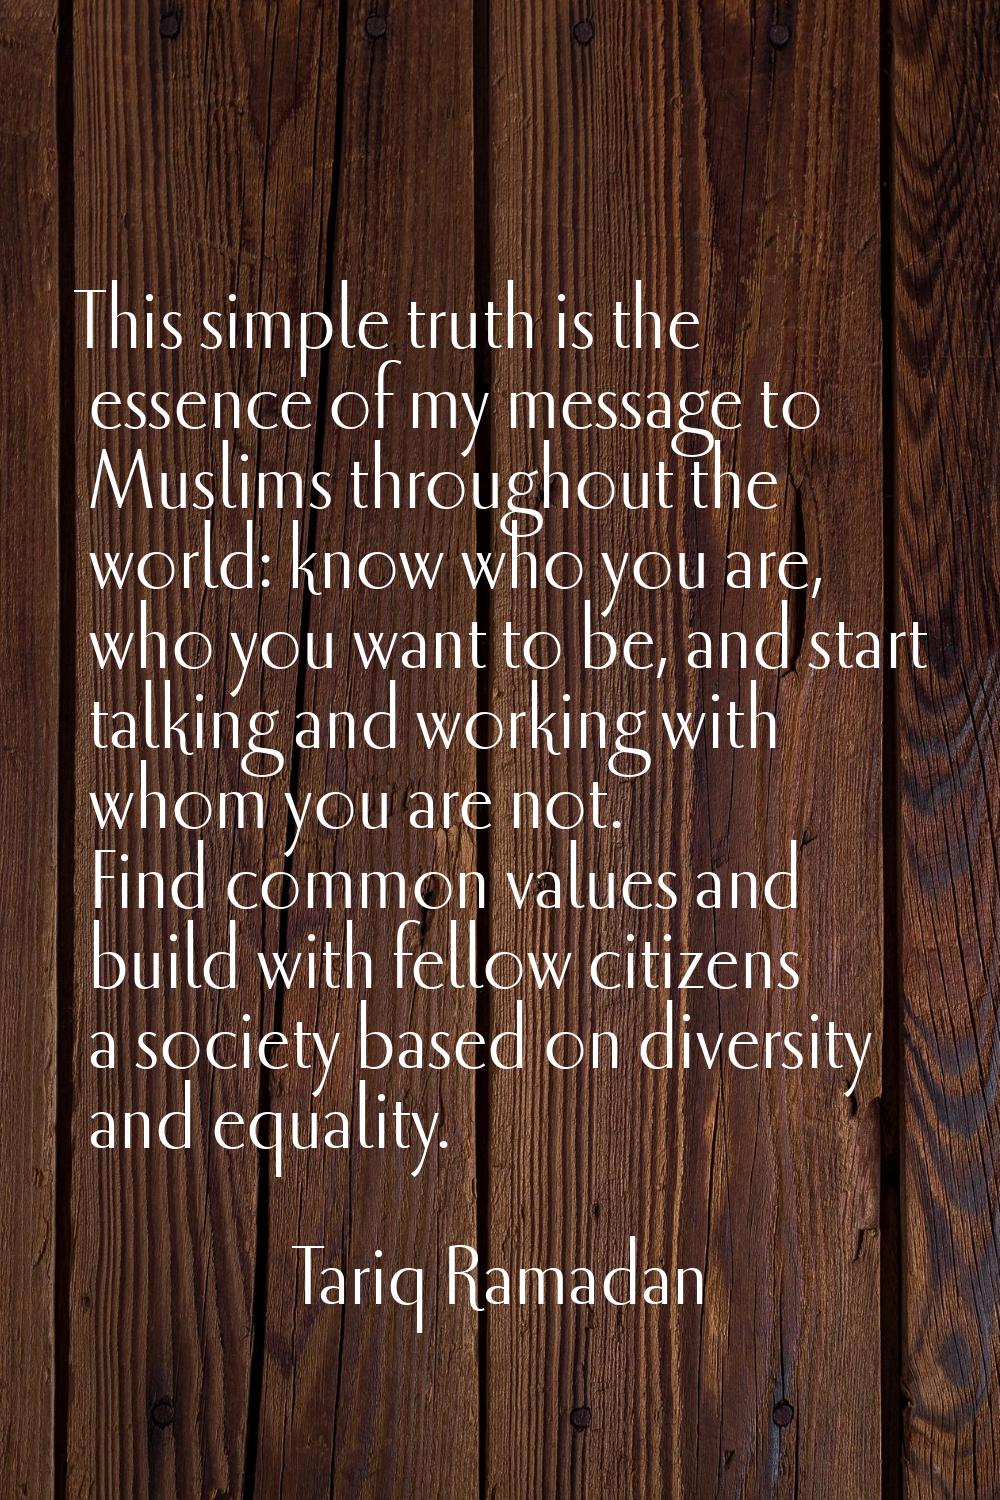 This simple truth is the essence of my message to Muslims throughout the world: know who you are, w